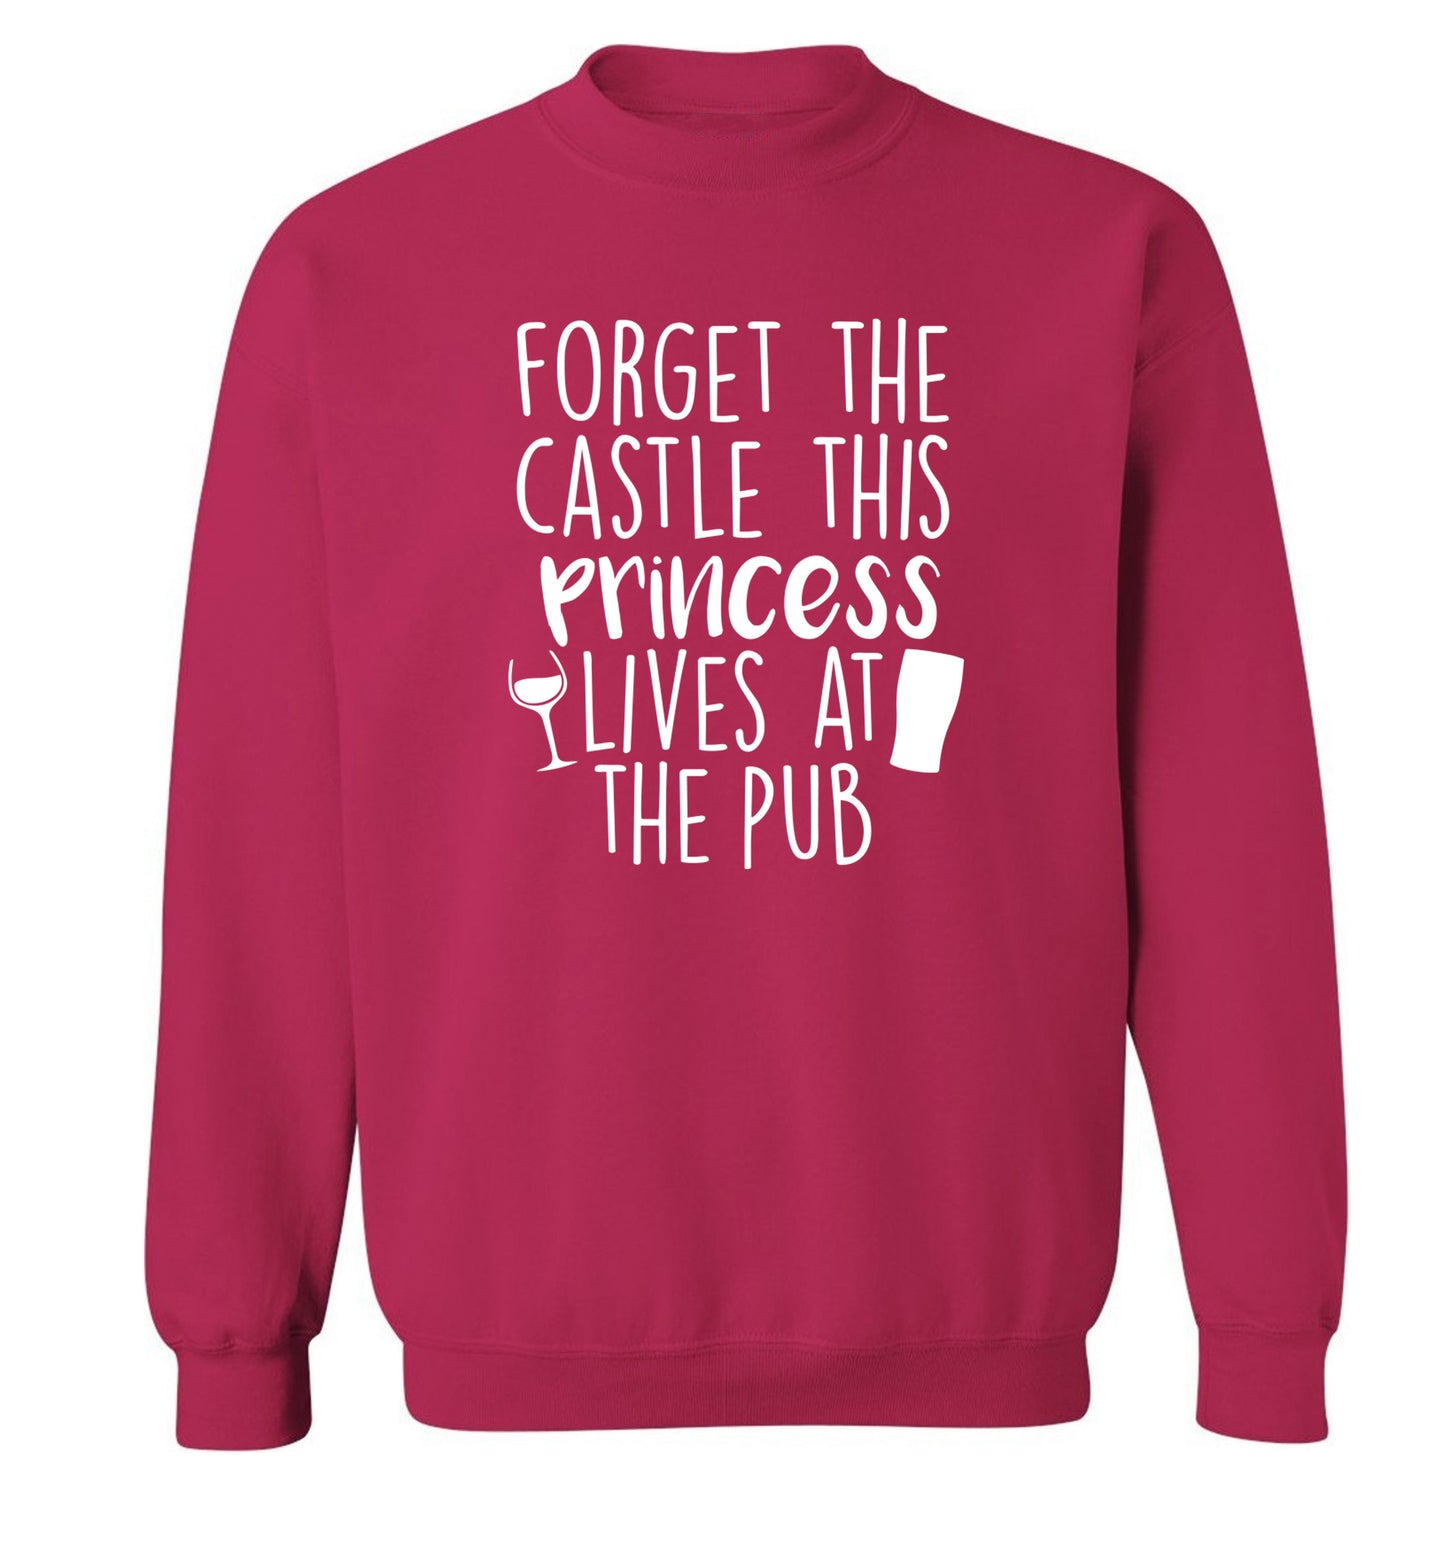 Forget the castle this princess lives at the pub Adult's unisex pink Sweater 2XL